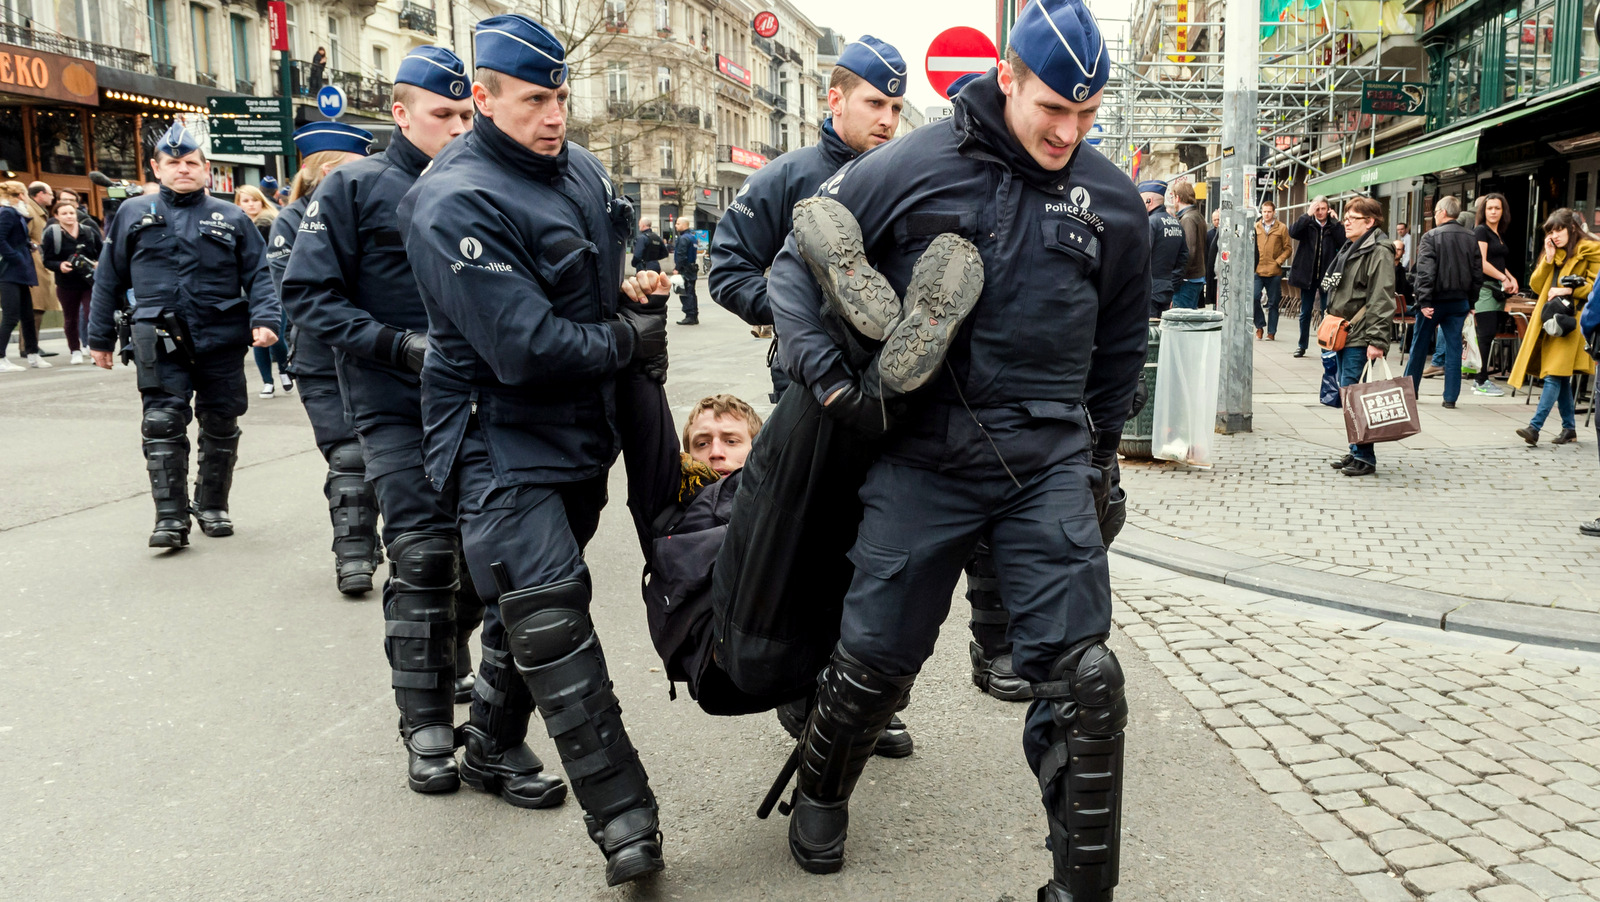 Policemen detain a man at the Place de la Bourse in Brussels, Belgium, after authorities banned all marches in Brussels. (AP Photo/Geert Vanden Wijngaert)